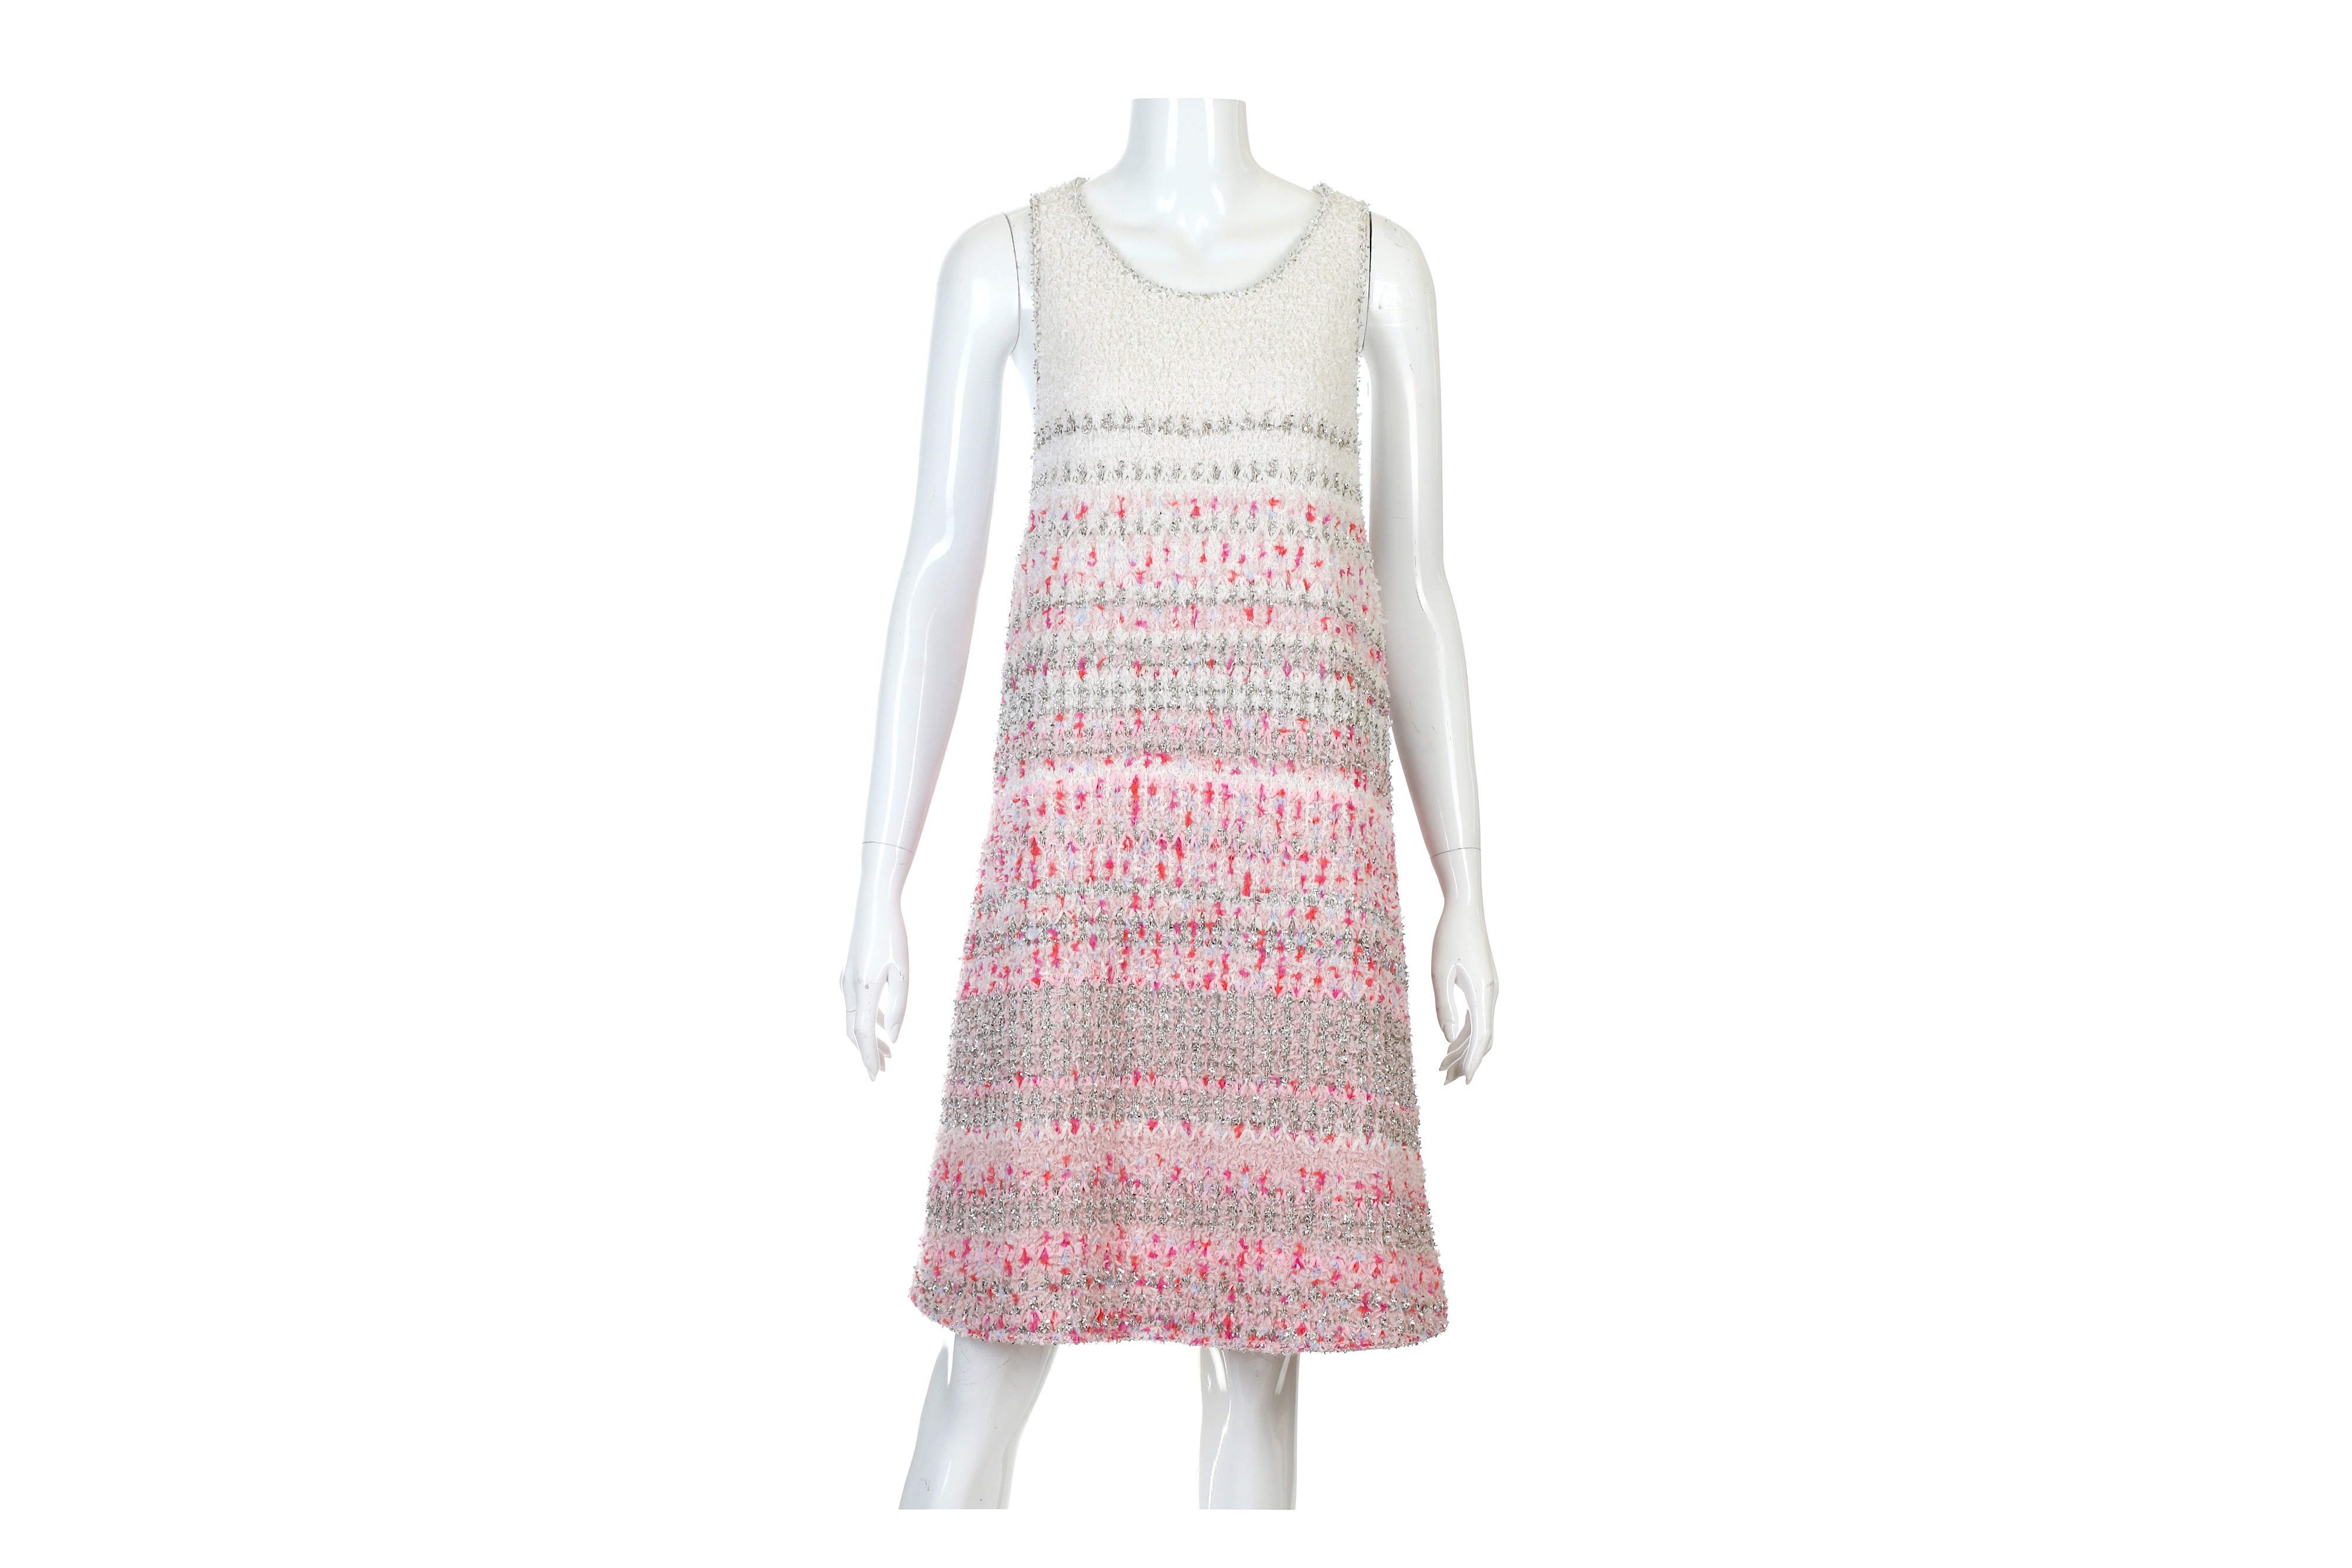 Chanel Pink and White A-Line Dress - Image 4 of 9